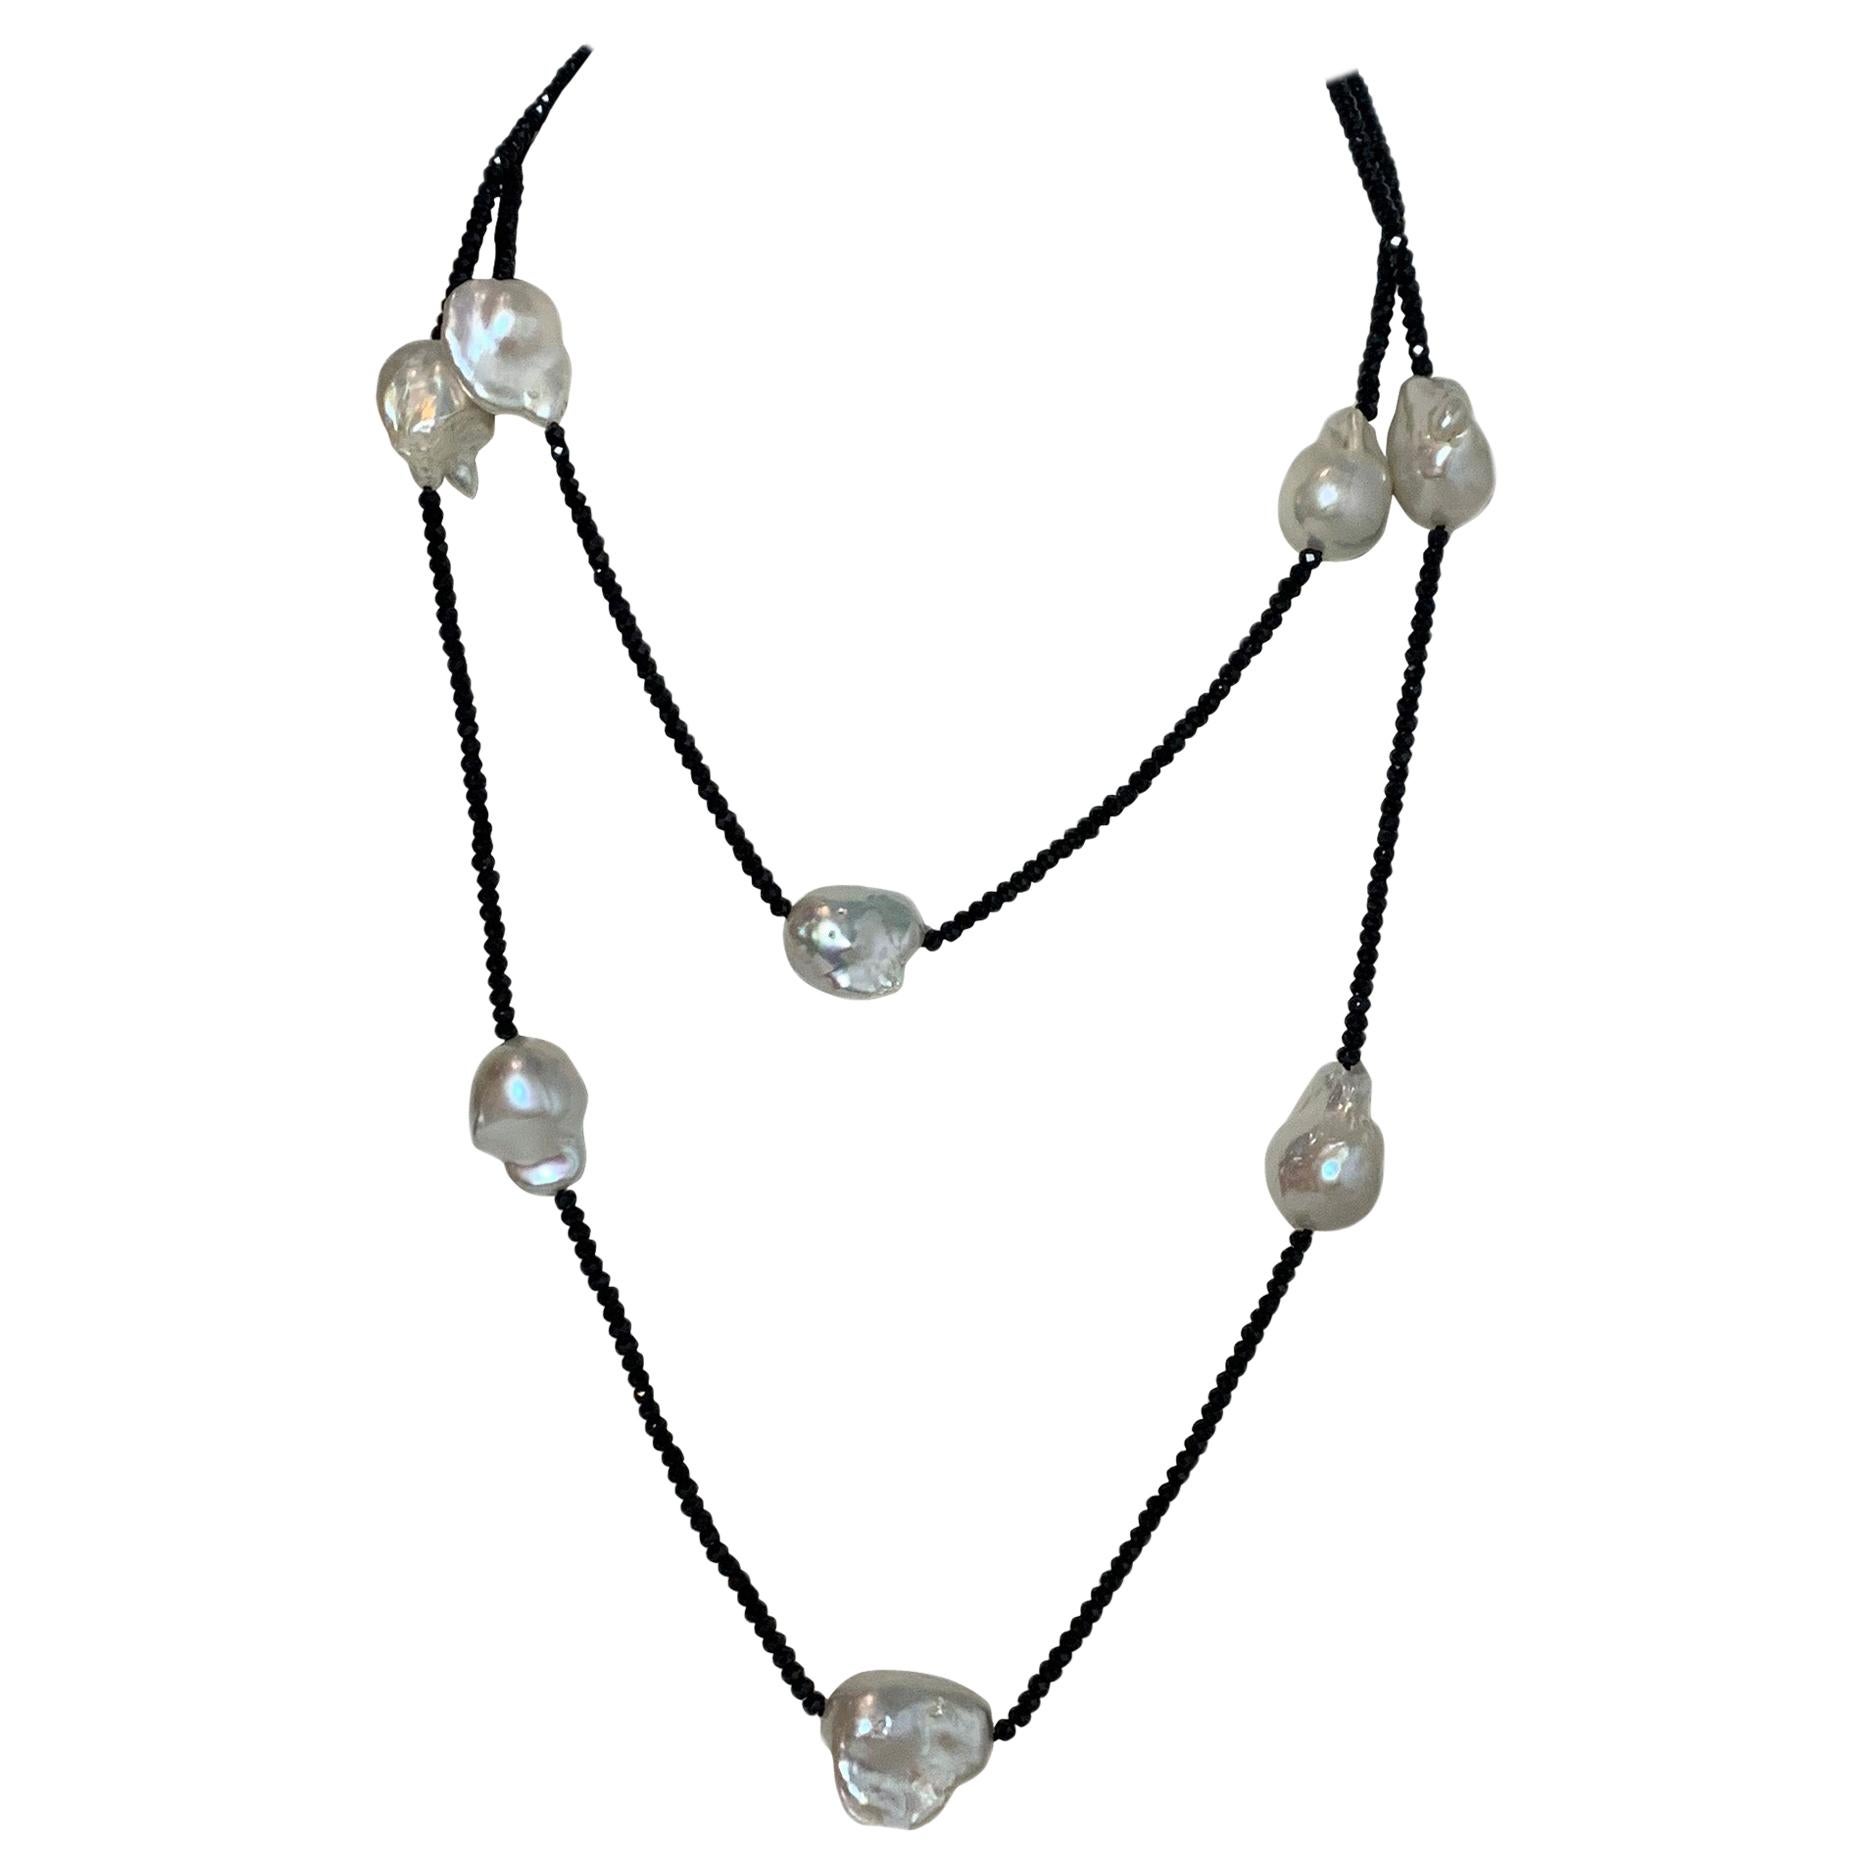 Arthur Marder 24mm Baroque Freshwater Pearl & Black Spinel Necklace rt $1, 000